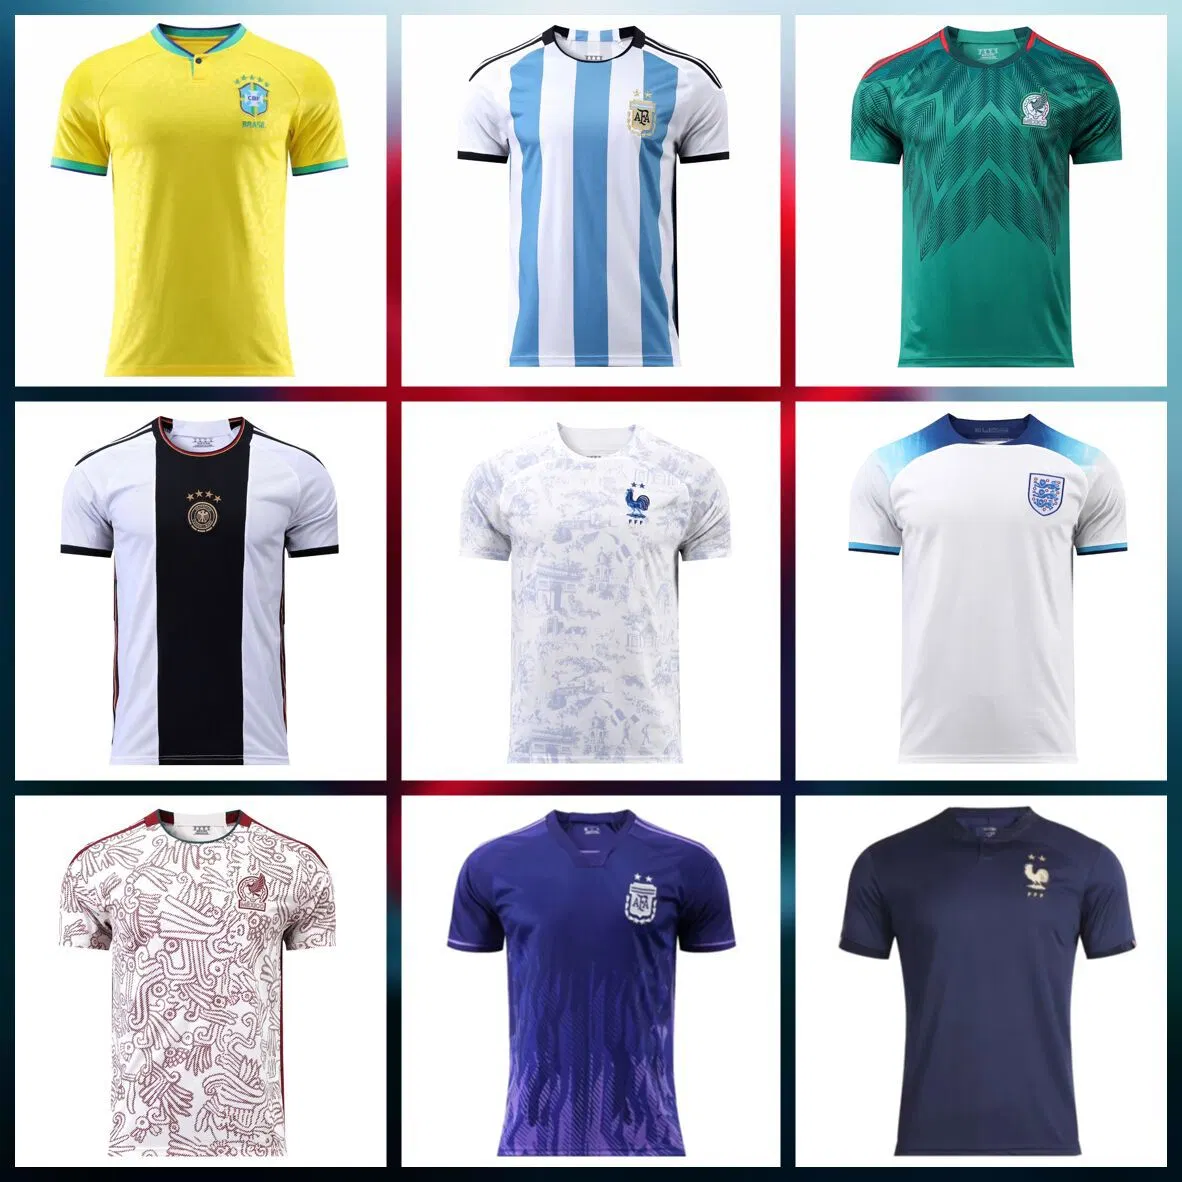 New Brazil Argentina Mexico England Home and Away Adult Football Soccer Shirt